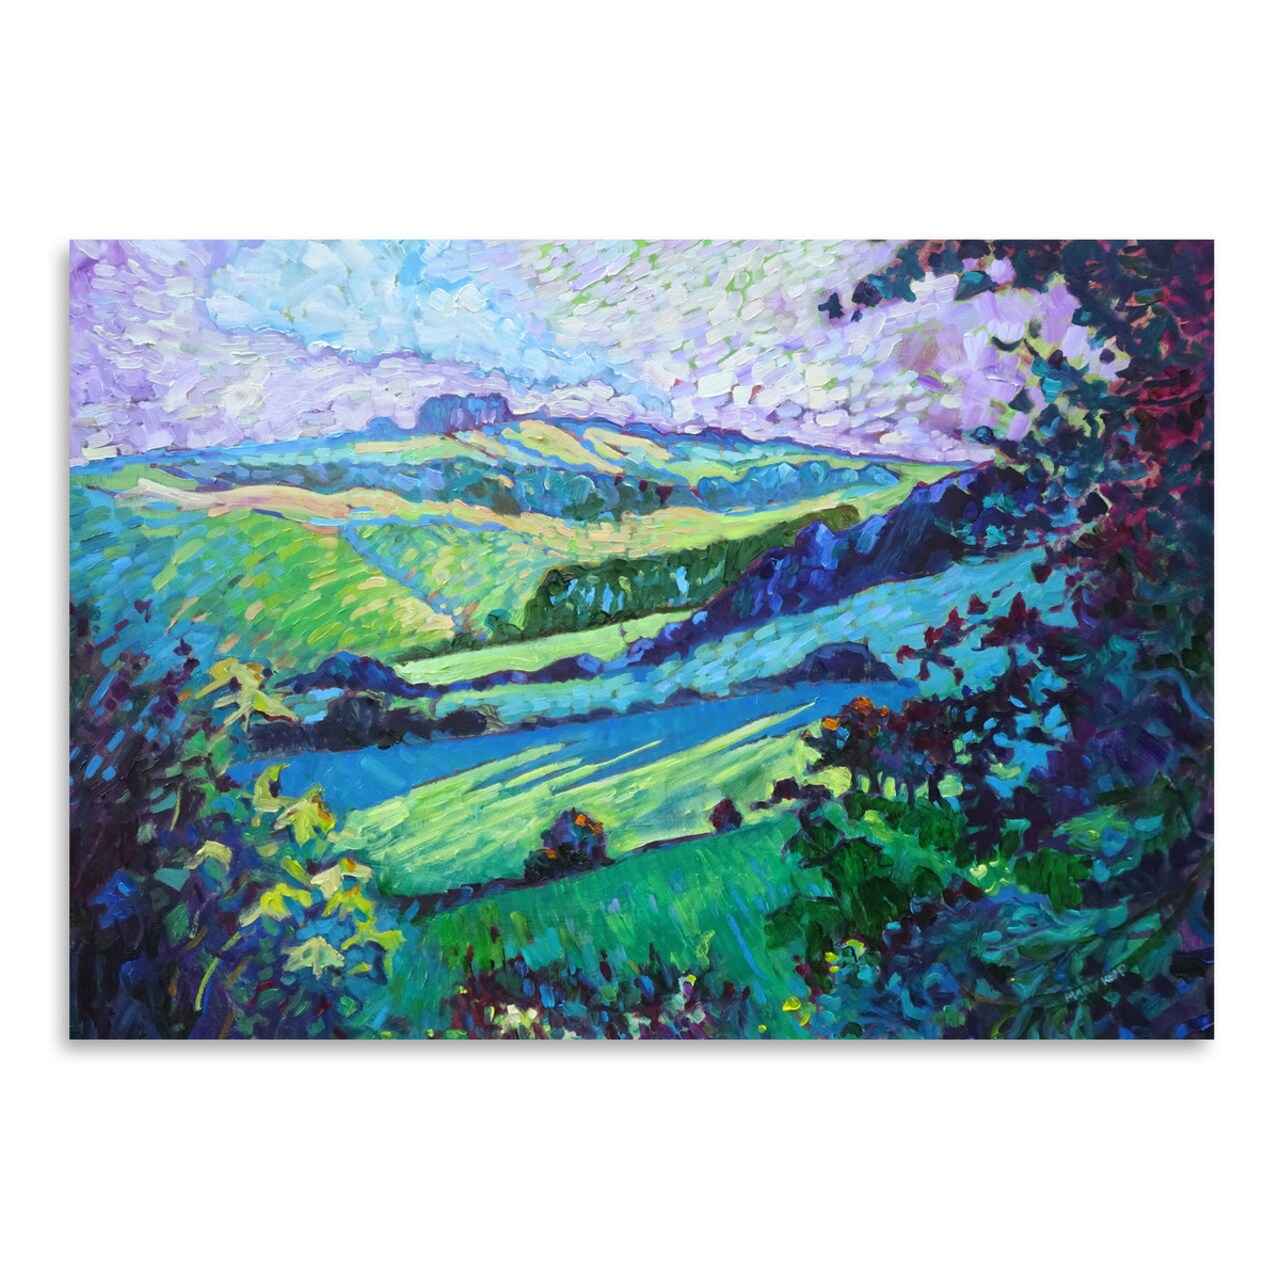 Derbyshire Hills by Mary Kemp  Poster Art Print - Americanflat